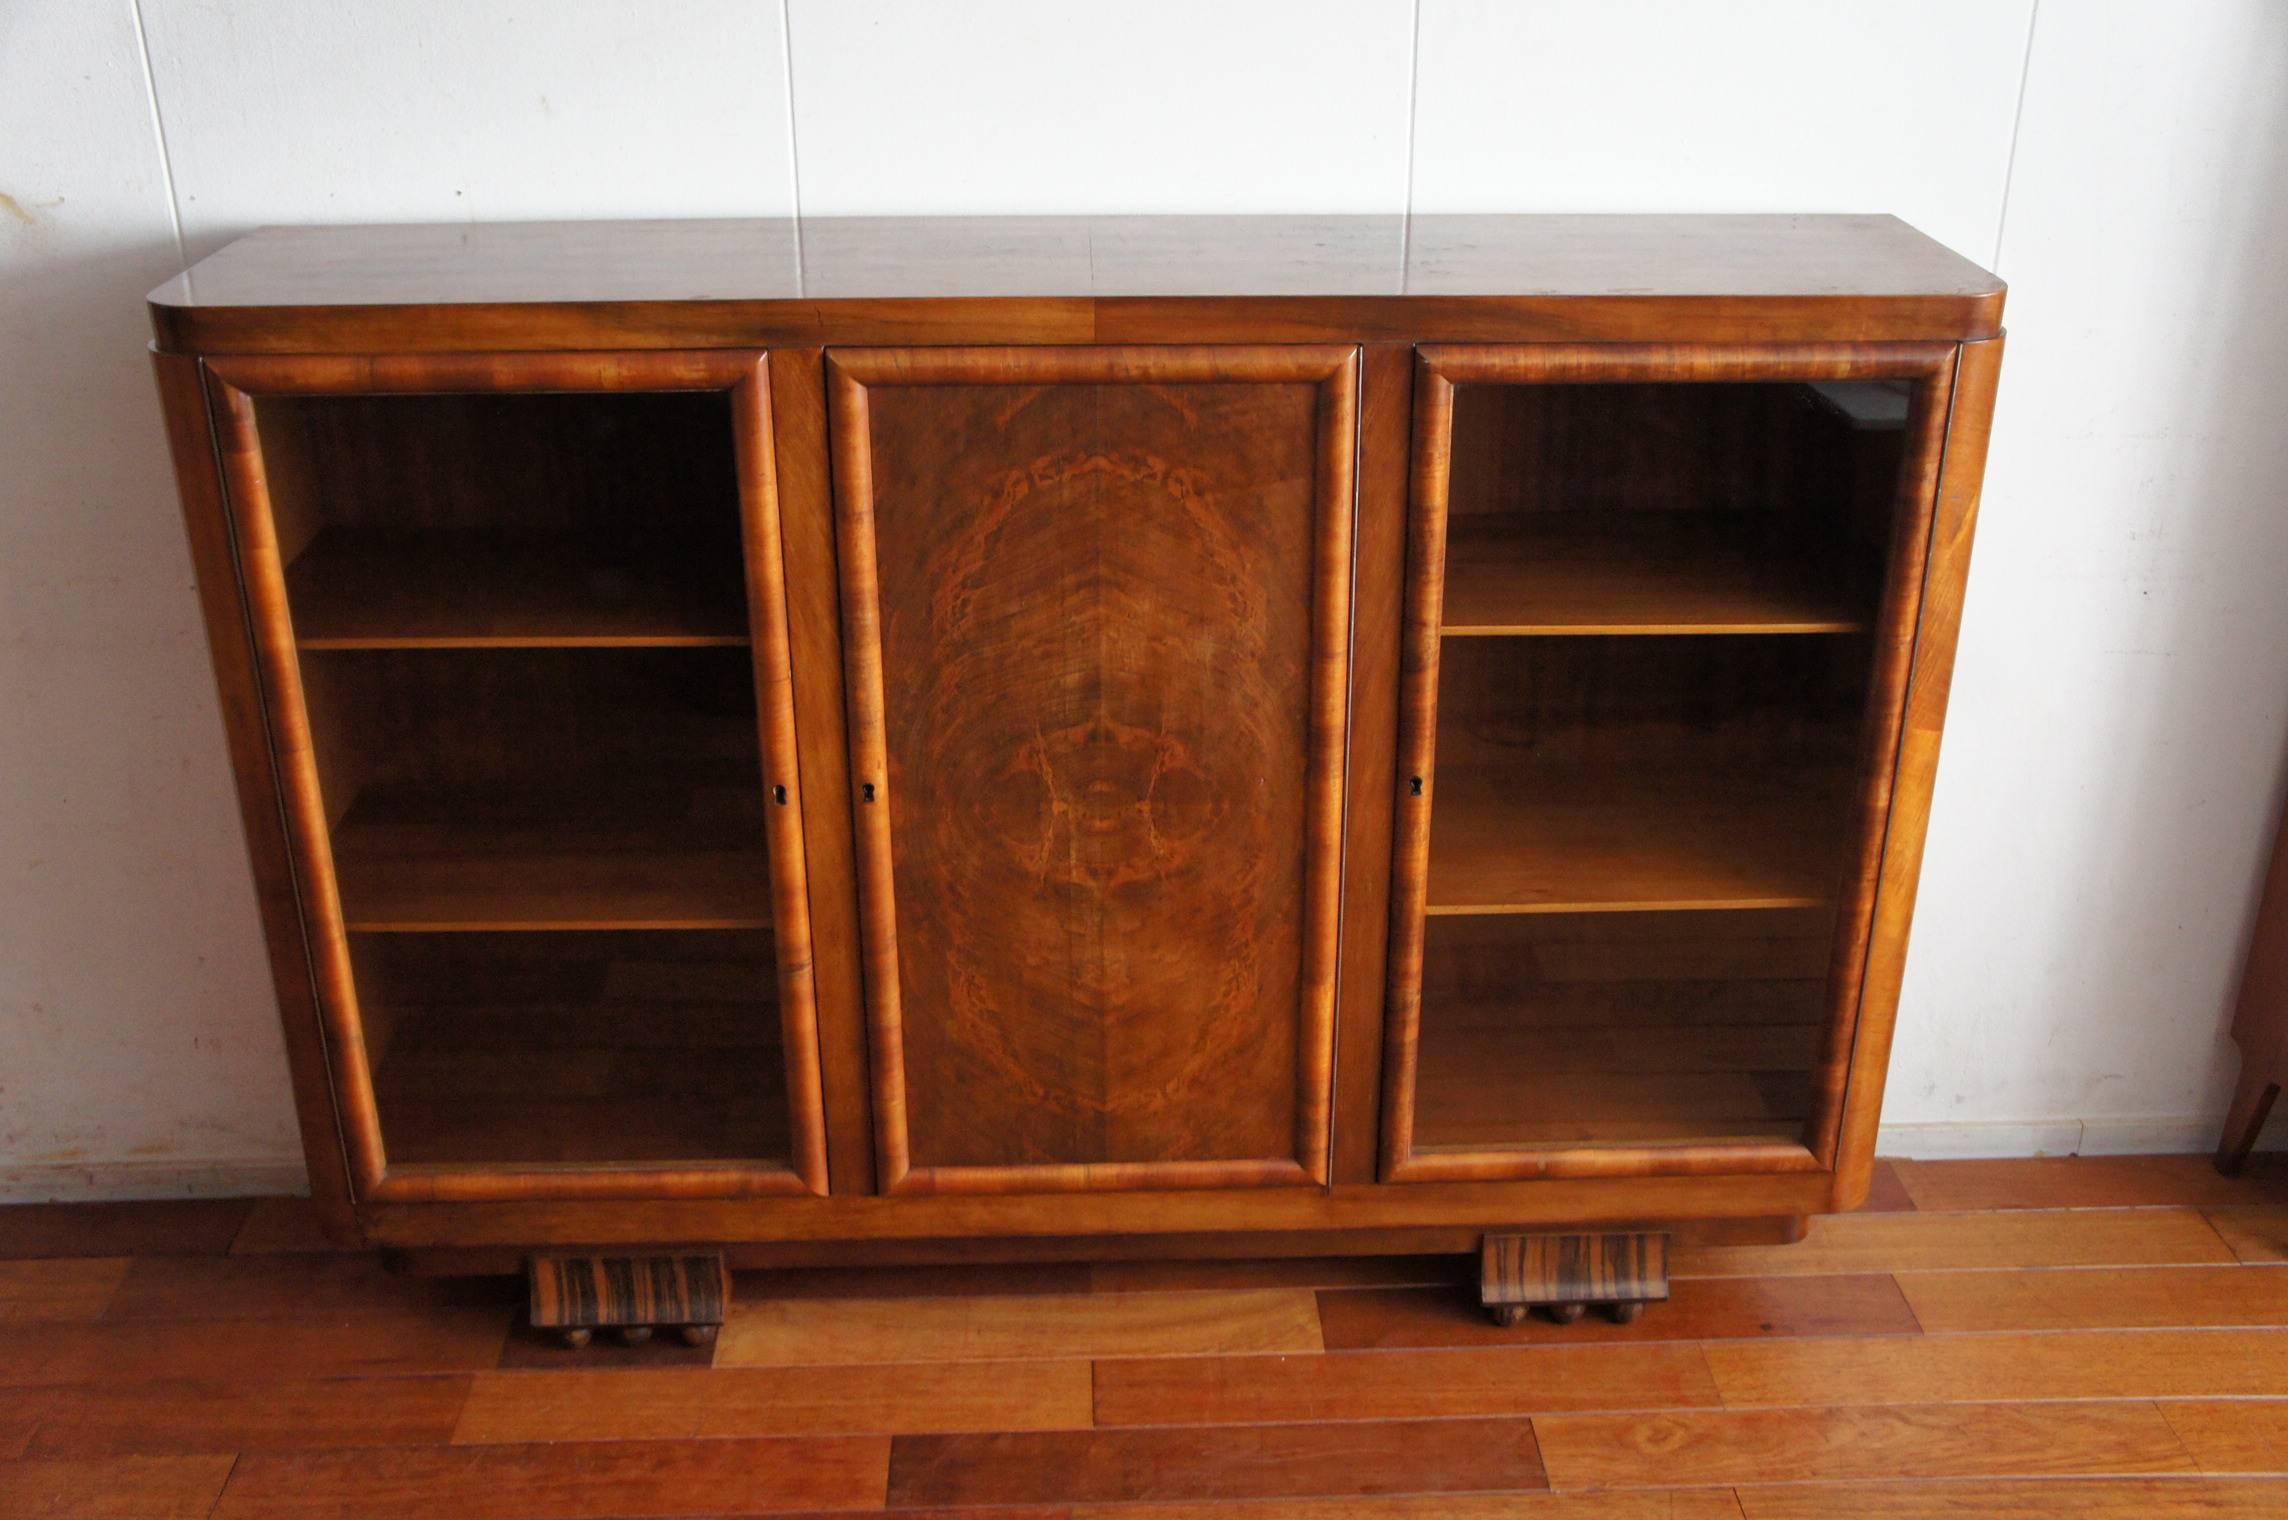 Pure Art Deco design bookcase of beautiful quality and condition.

If you are looking for a unique, good quality and excellent condition bookcase then this practical size specimen could be perfect for you. The combination of the light colored